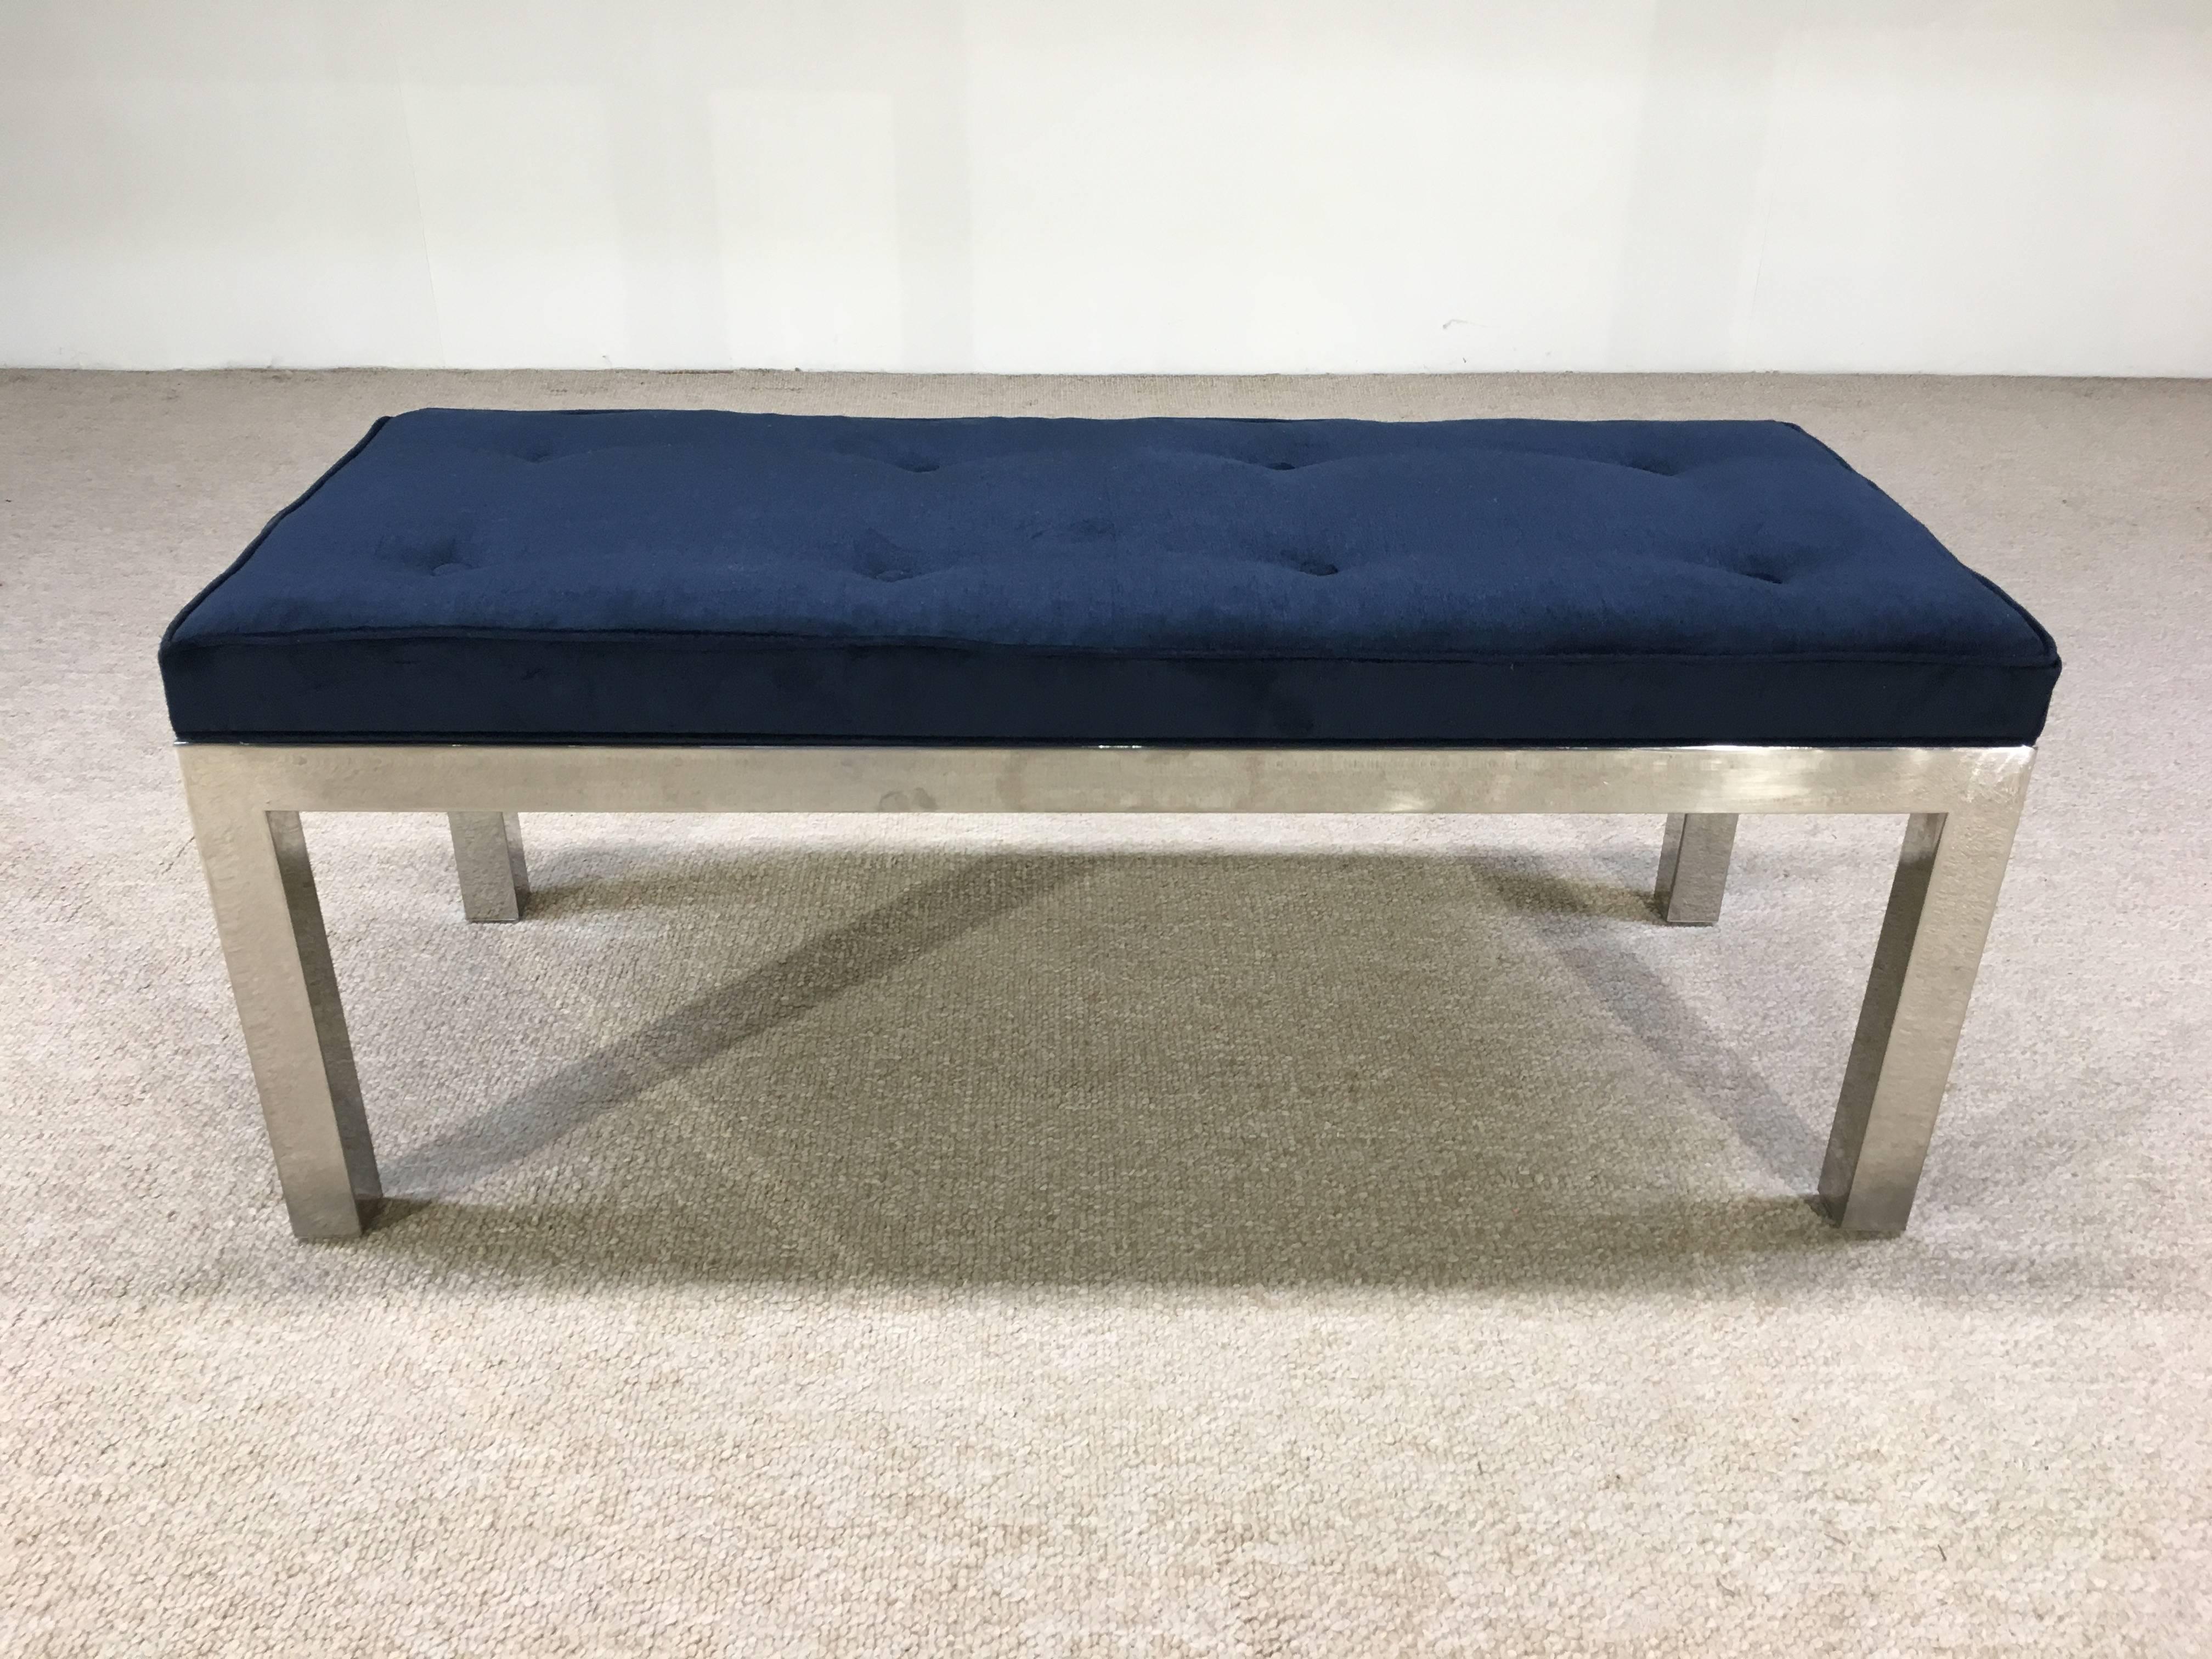 A stunning Milo Baughman bench having a squared chromed steel frame and beautiful, newly upholstered tufted velvet seat.